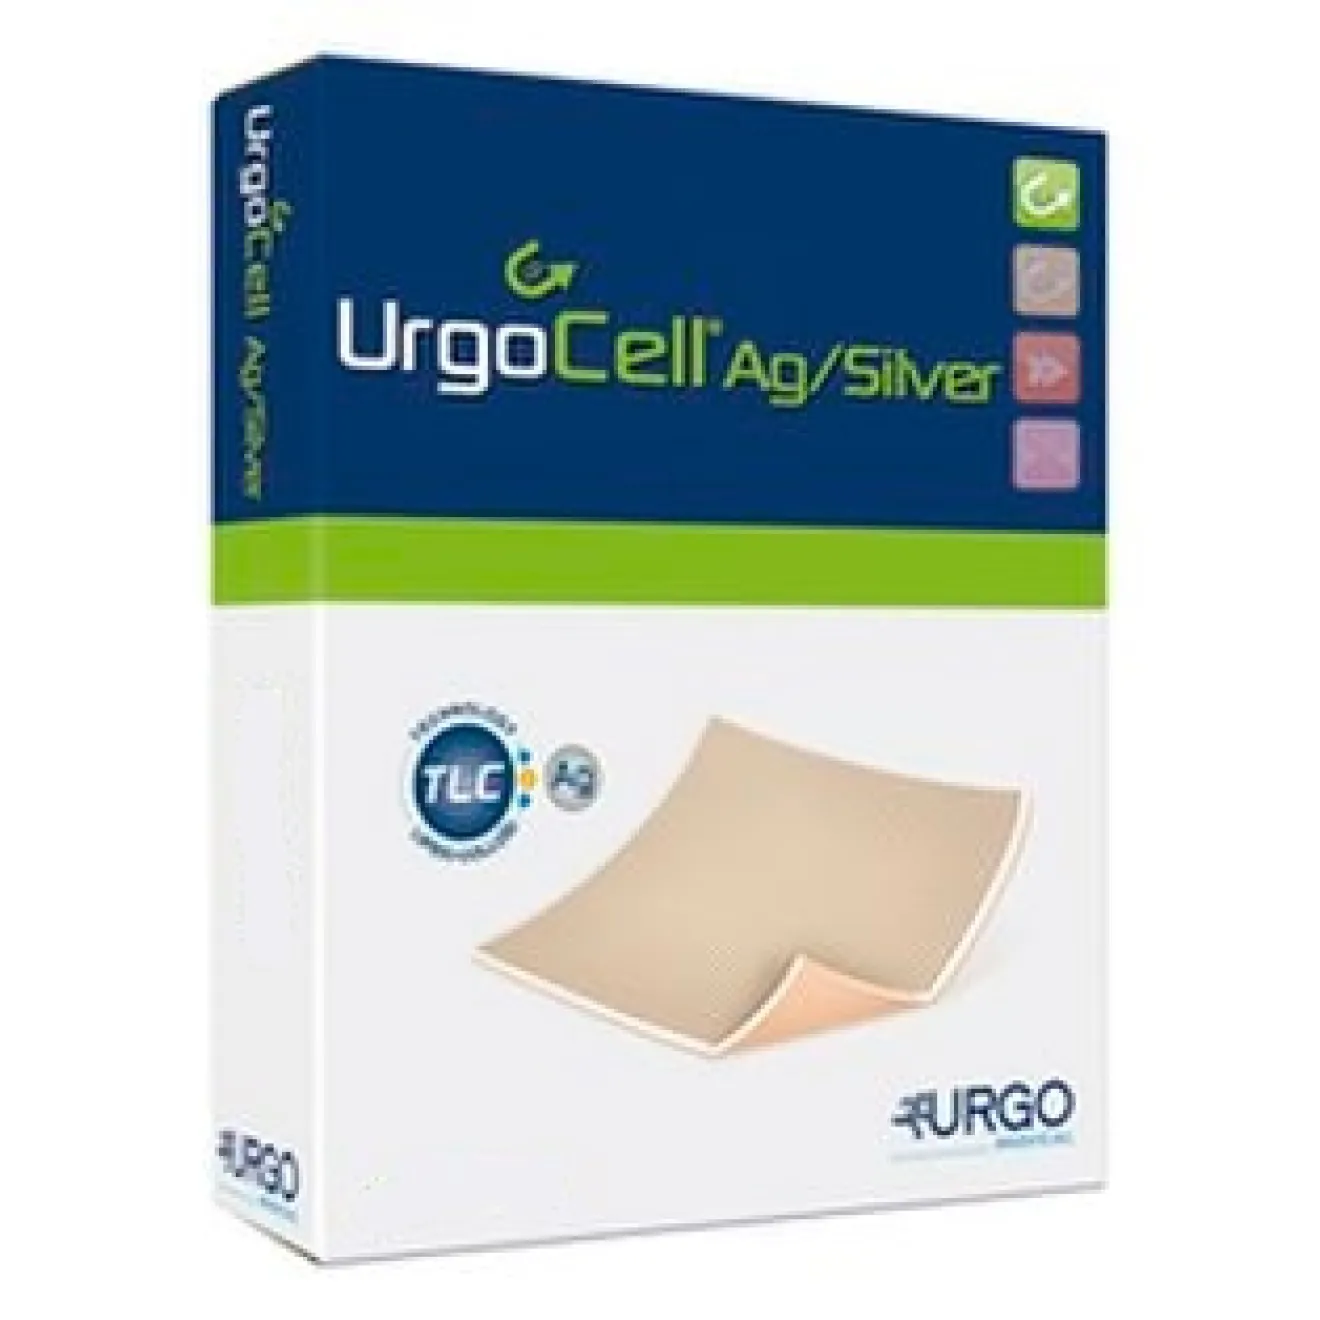 URGOCELL silver Non Adhesive Verband 6x6 cm 10 ST